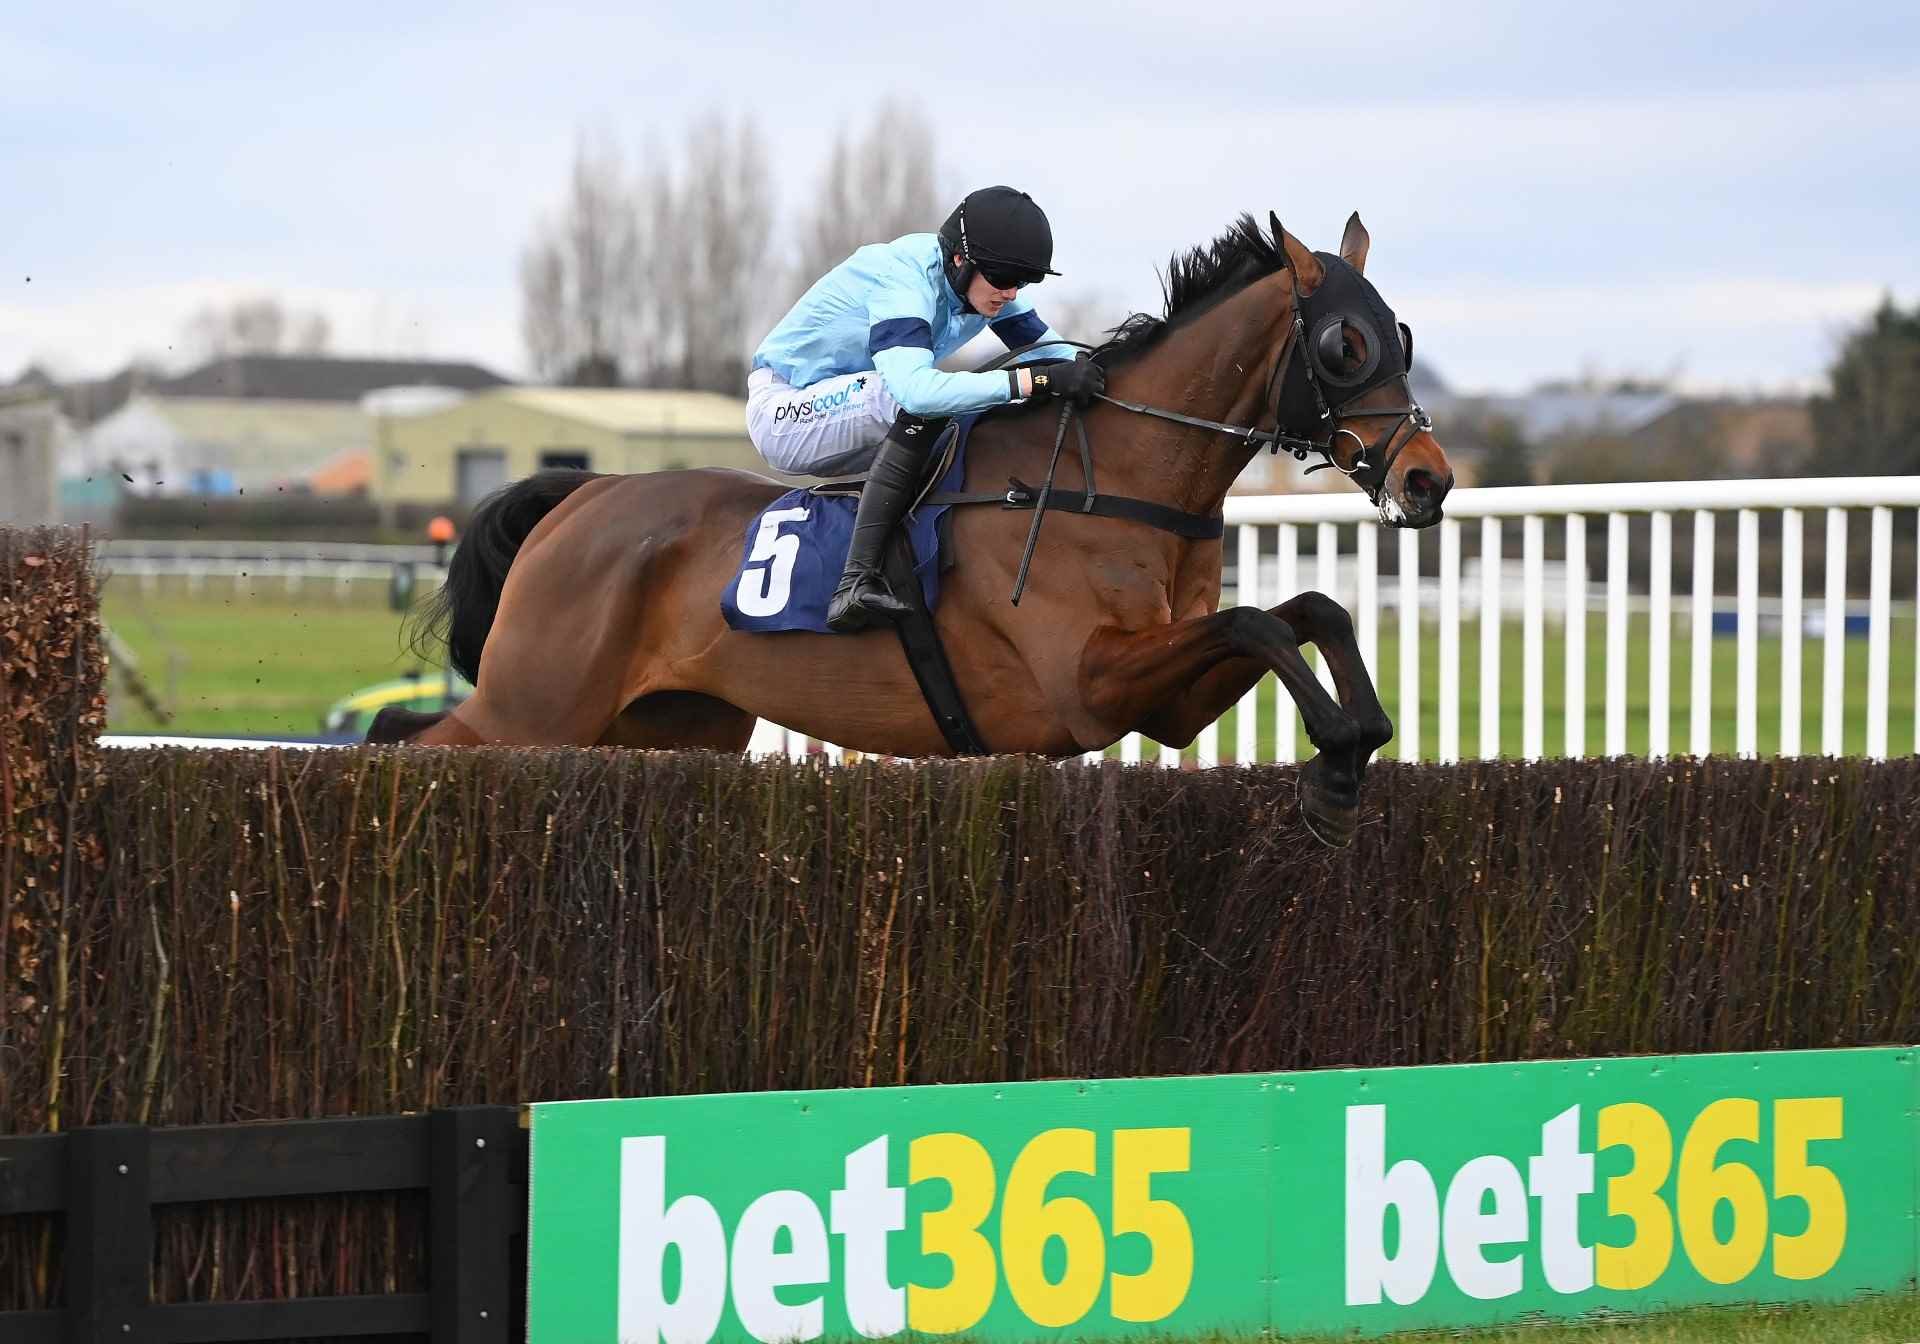 Mount Tempest winning the Handicap Chase at Wetherby